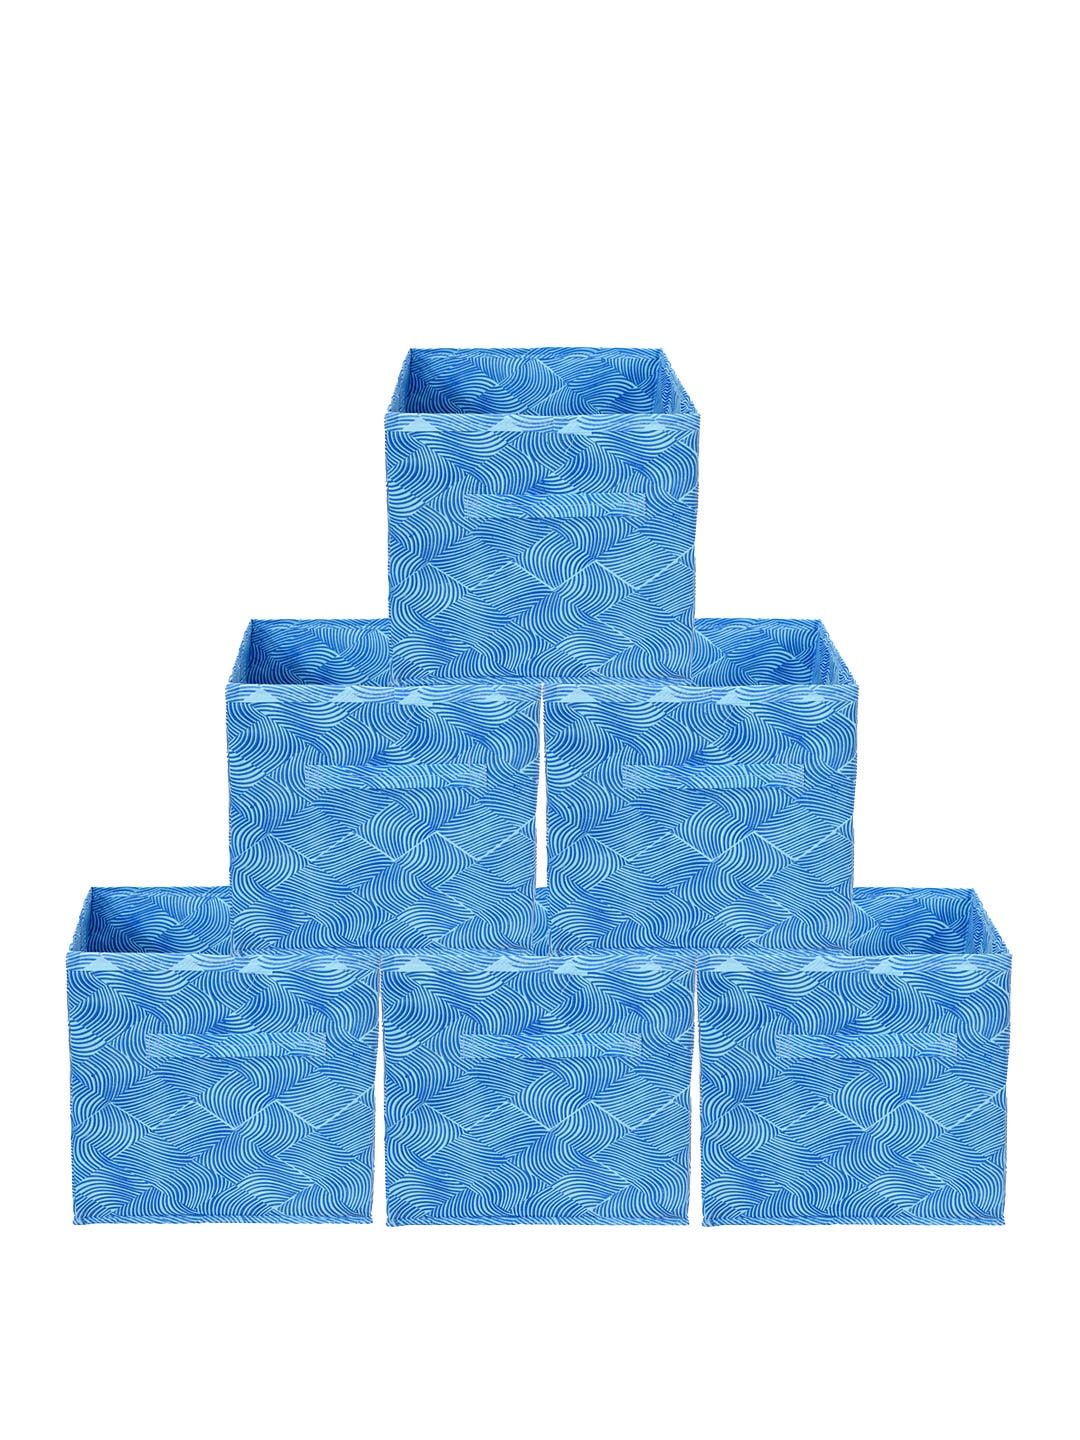 Kuber Industries Set Of 6 Blue Leheriya Printed Foldable Storage Boxes With Handle Replacement Drawer Price in India